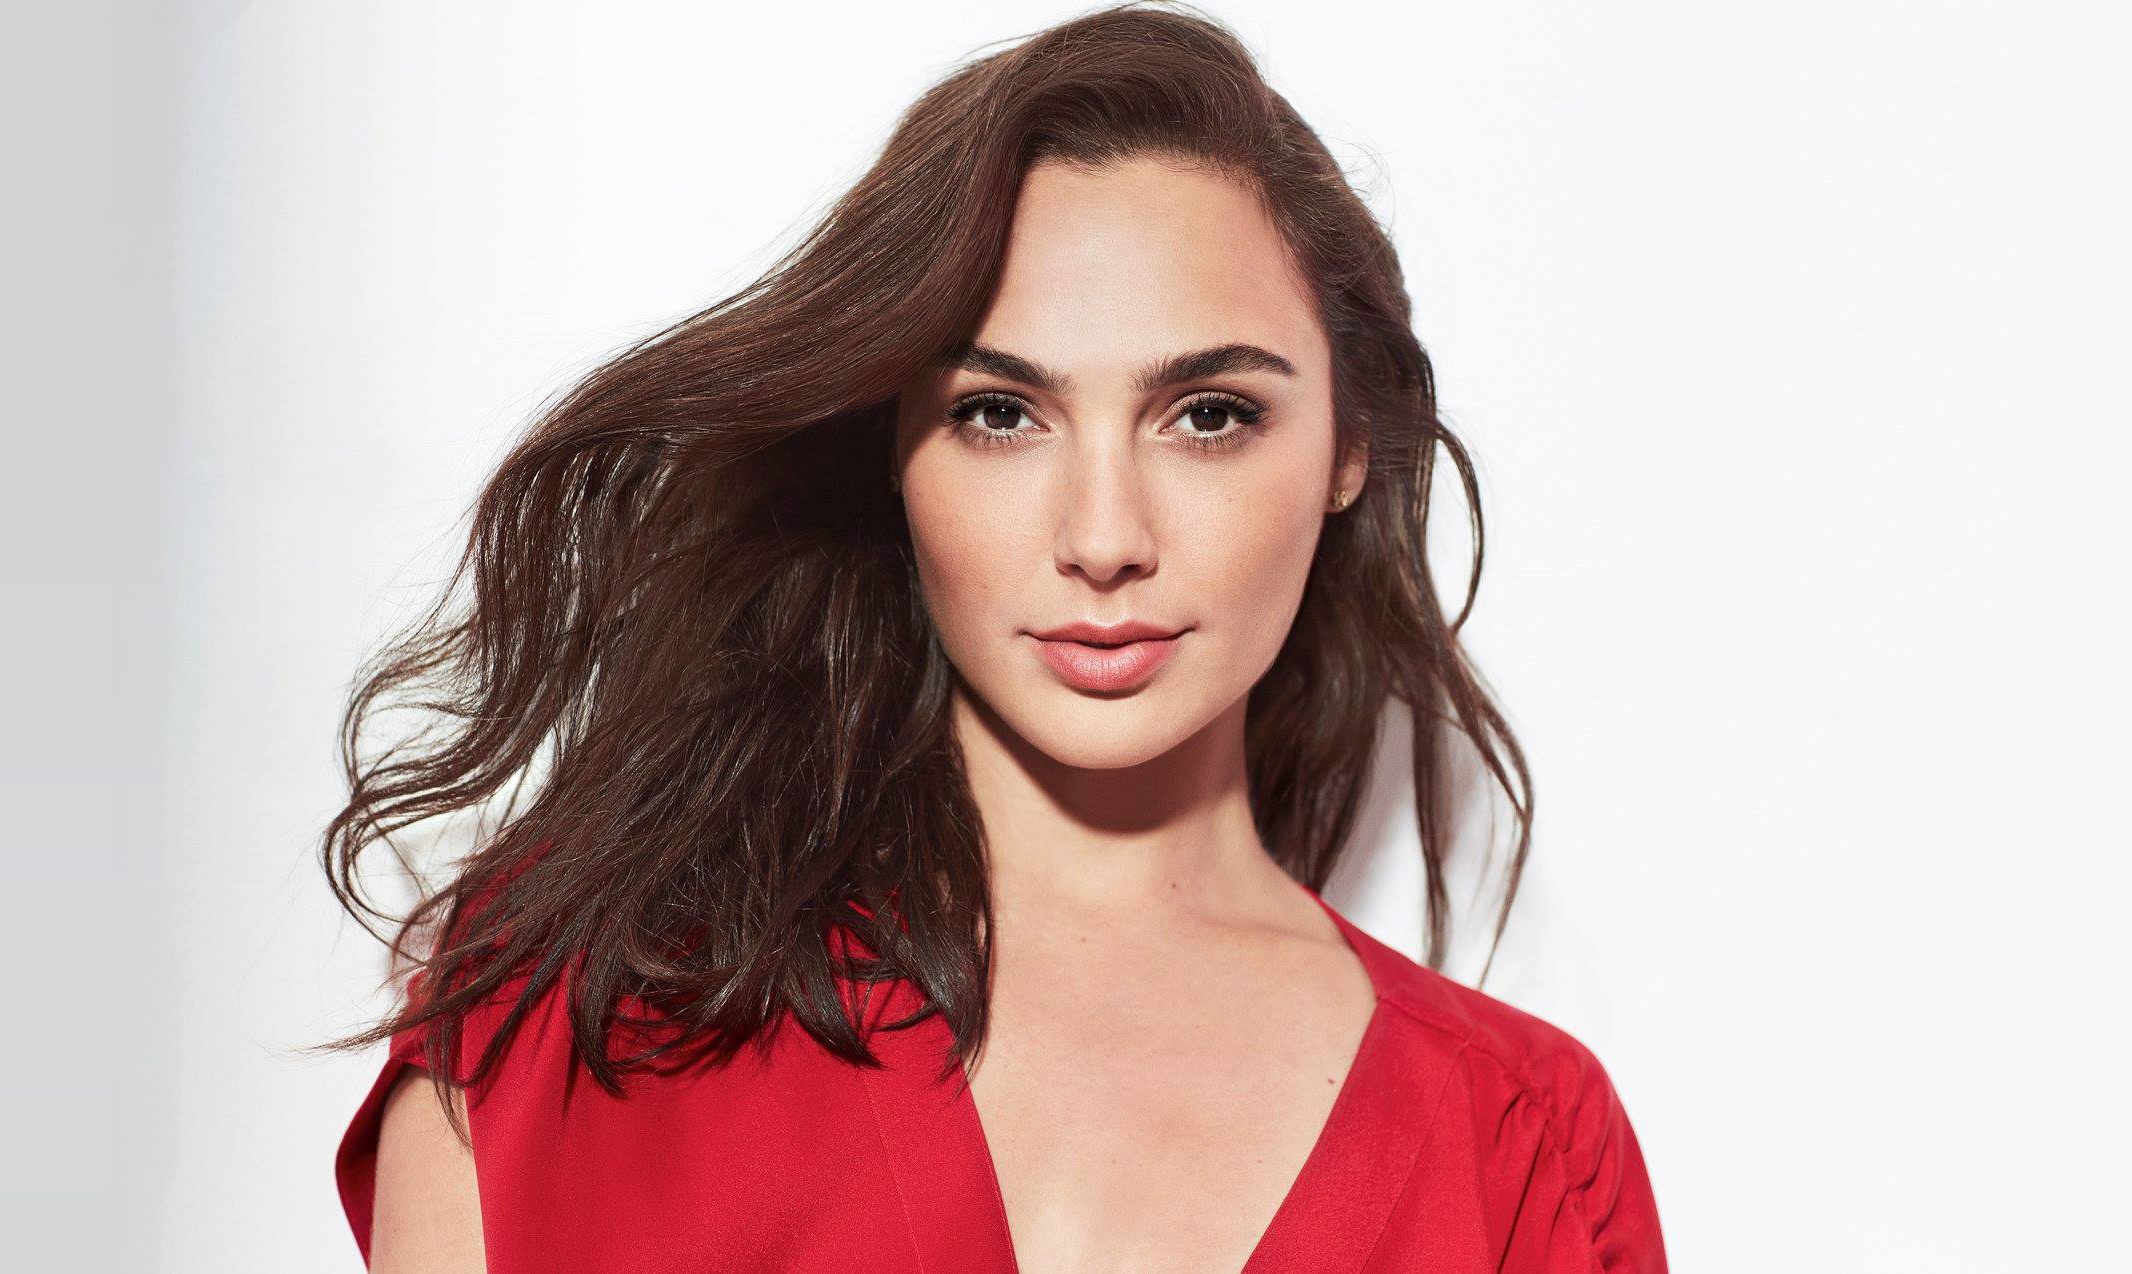 2019 Gal Gadot Wallpaper Hd Celebrities 4k Wallpapers Images Photos And Background 